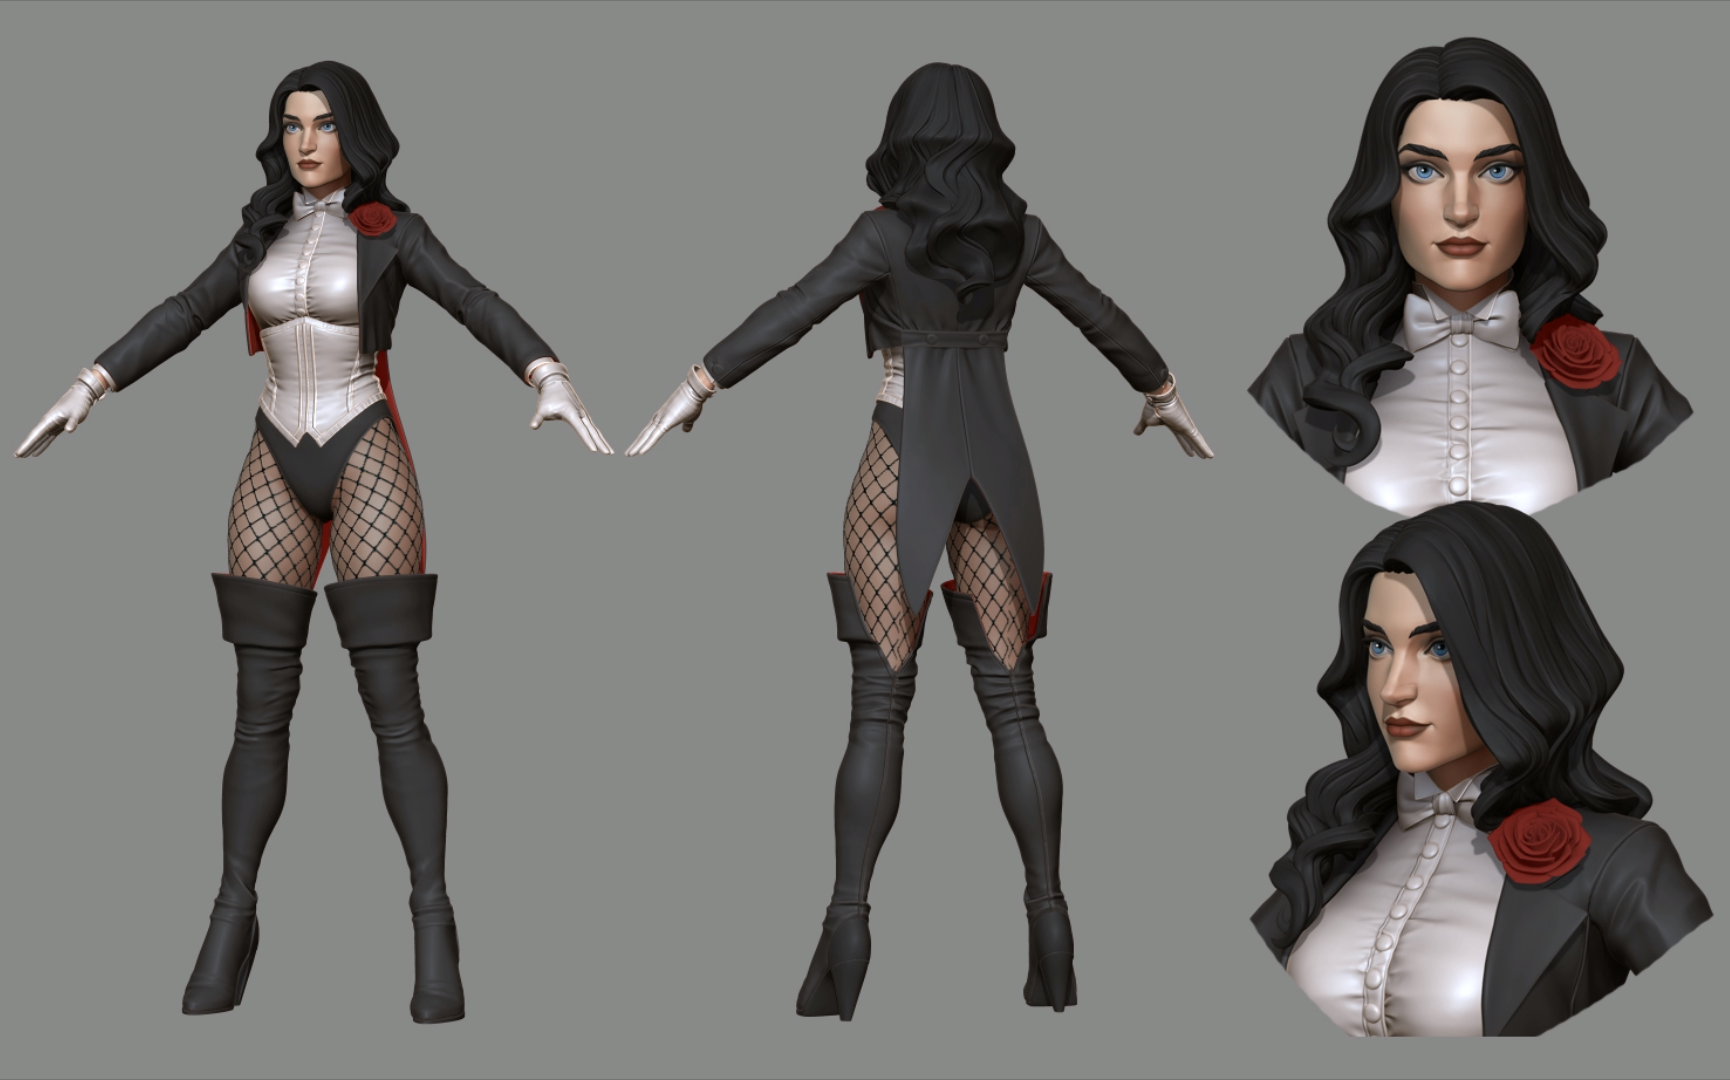  First off, we get a look at Zatanna Zatara’s new NPC model, getting a refresh much like other in-game models have received. The design is equal parts from the Rebirth, and combined with other takes on her appearance from earlier comics coming into a